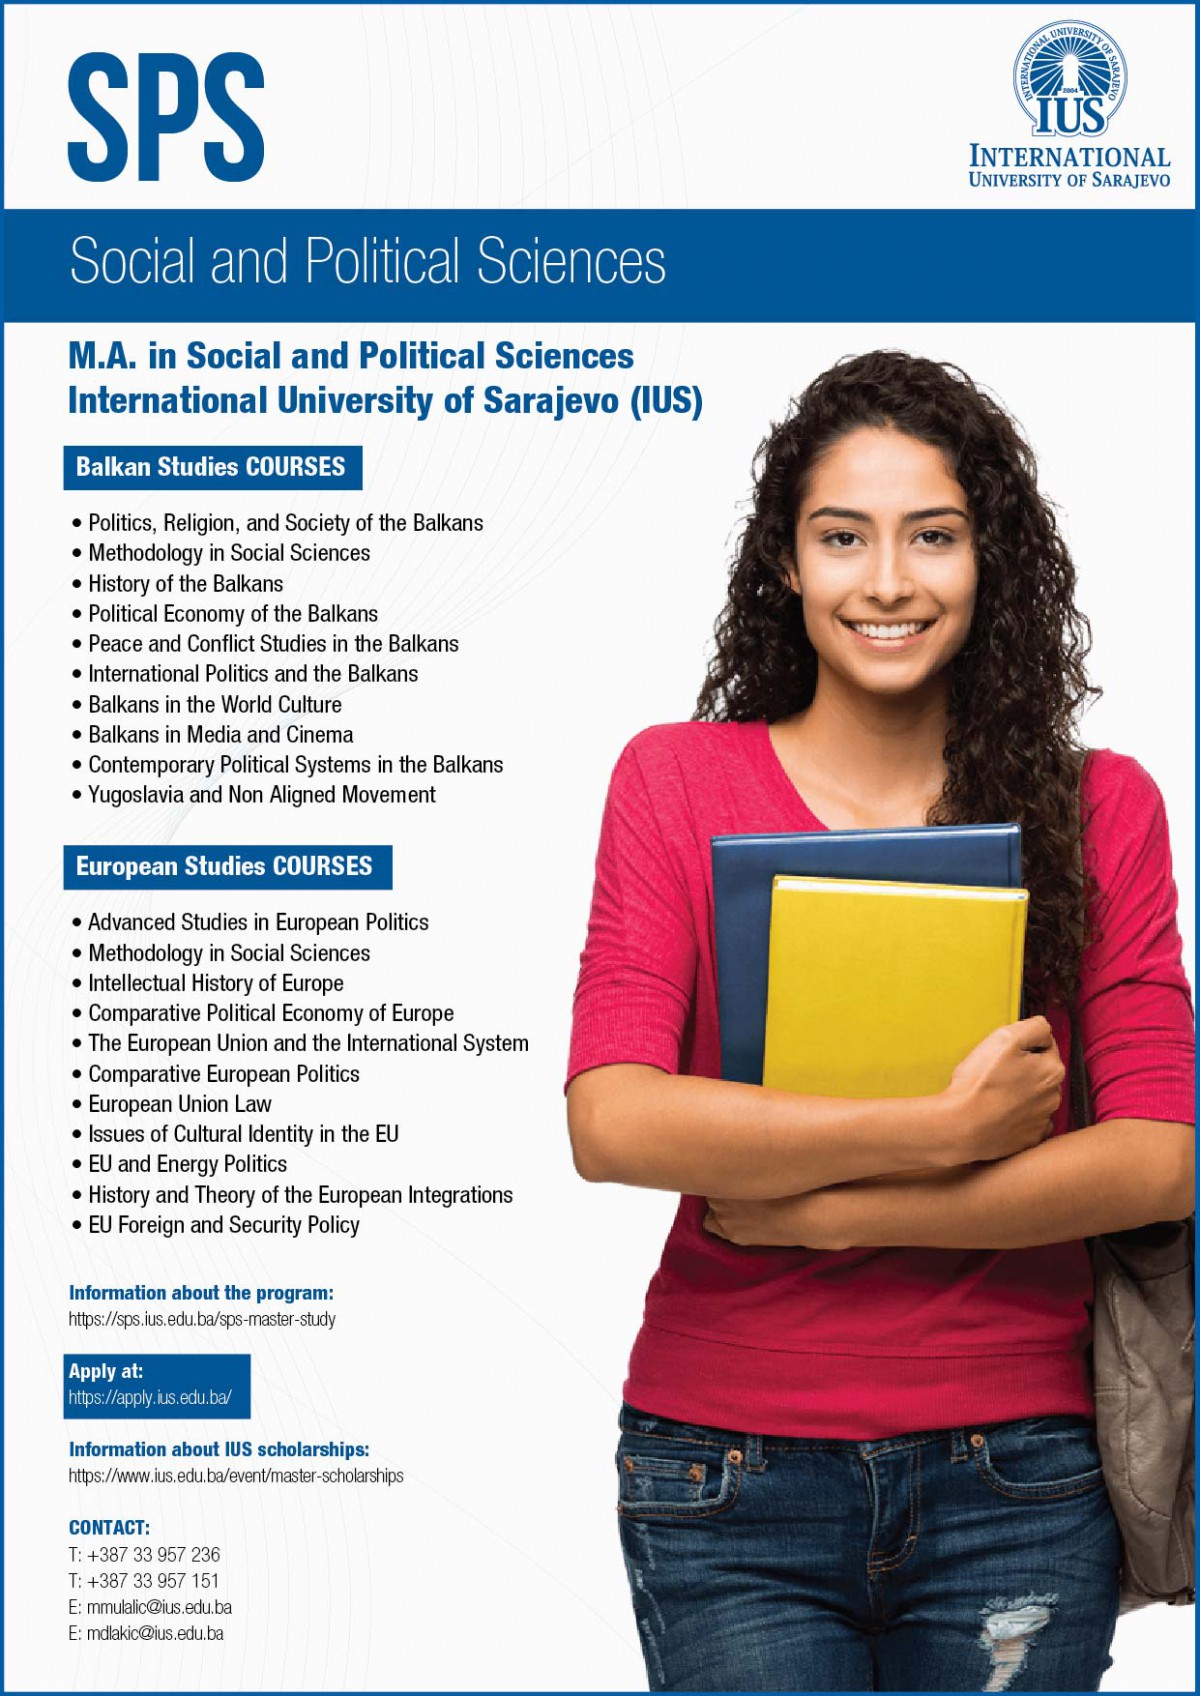  Study Social and Political Science at IUS! 